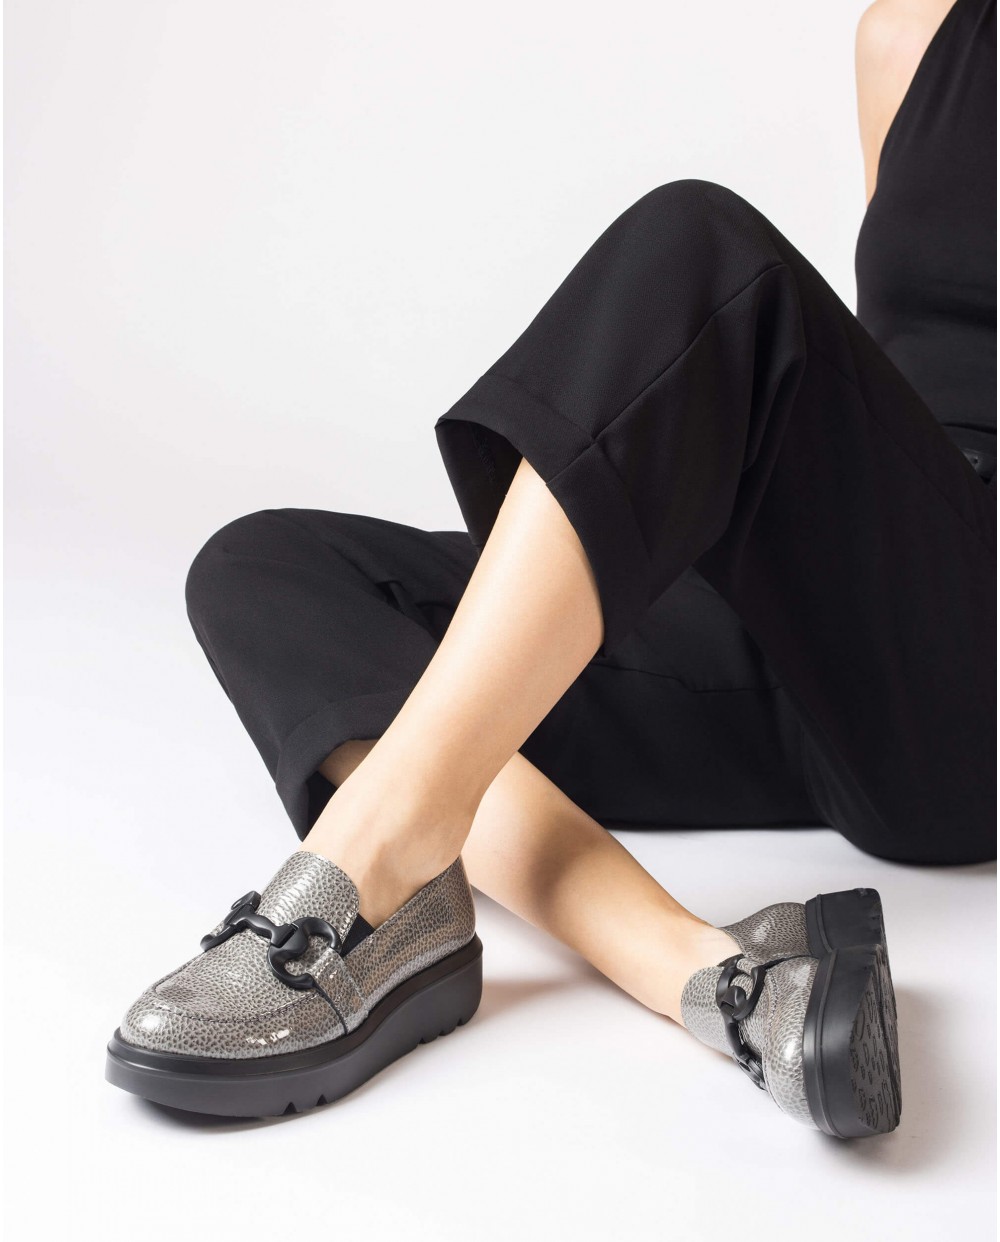 Wonders-Loafers-Grey MIRA moccasin